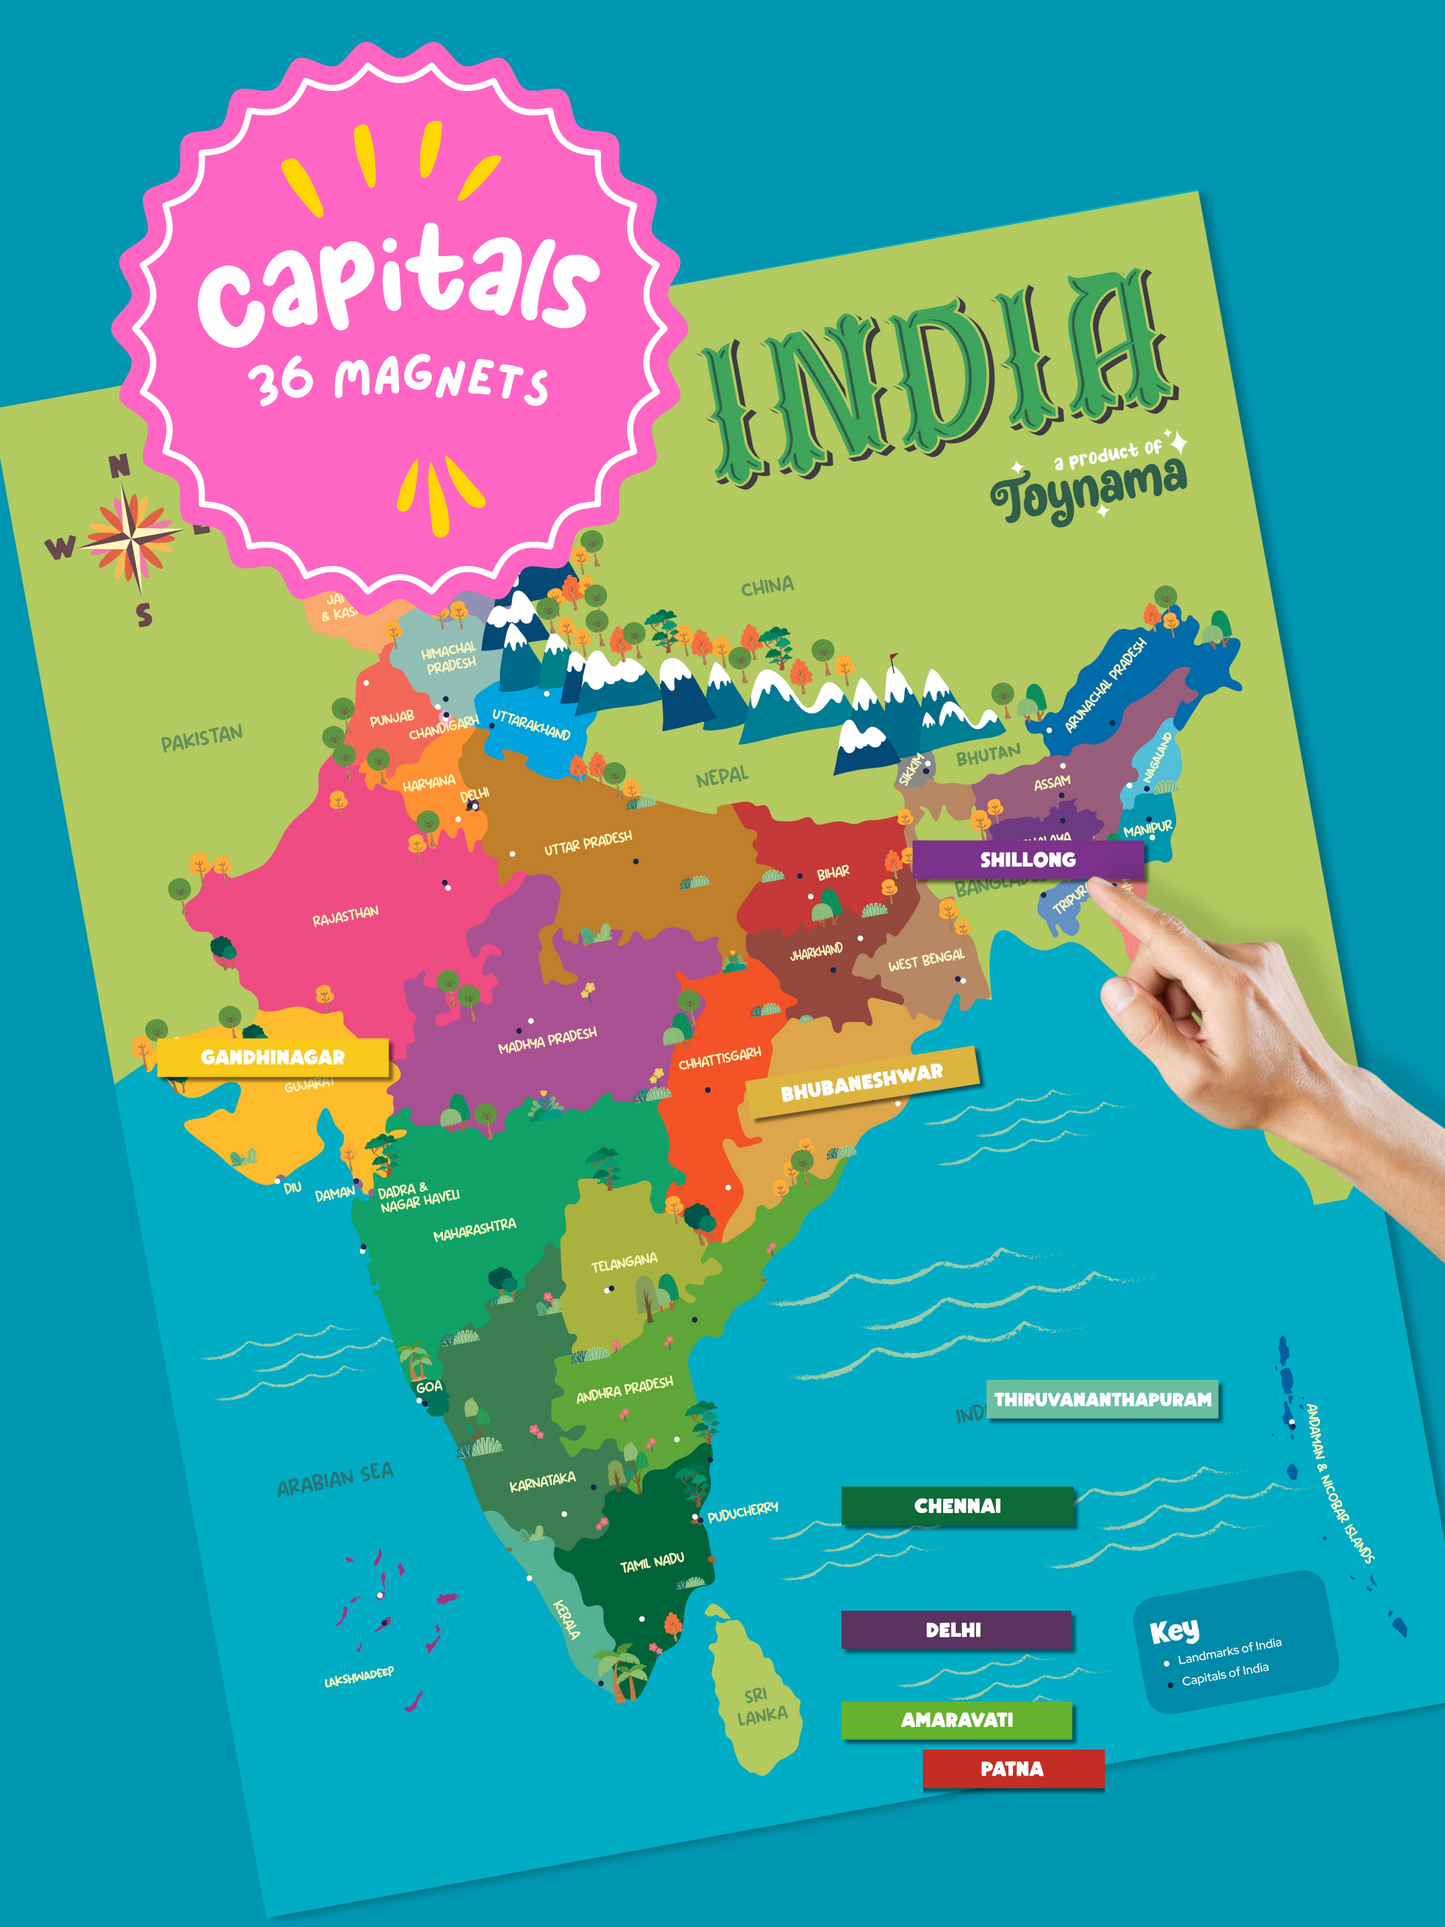 Toynama Interactive India Map for Kids - Wall Mountable Map with Capitals, Landmarks Dances and Festivals Magnetic Tiles Ages 5 and Up